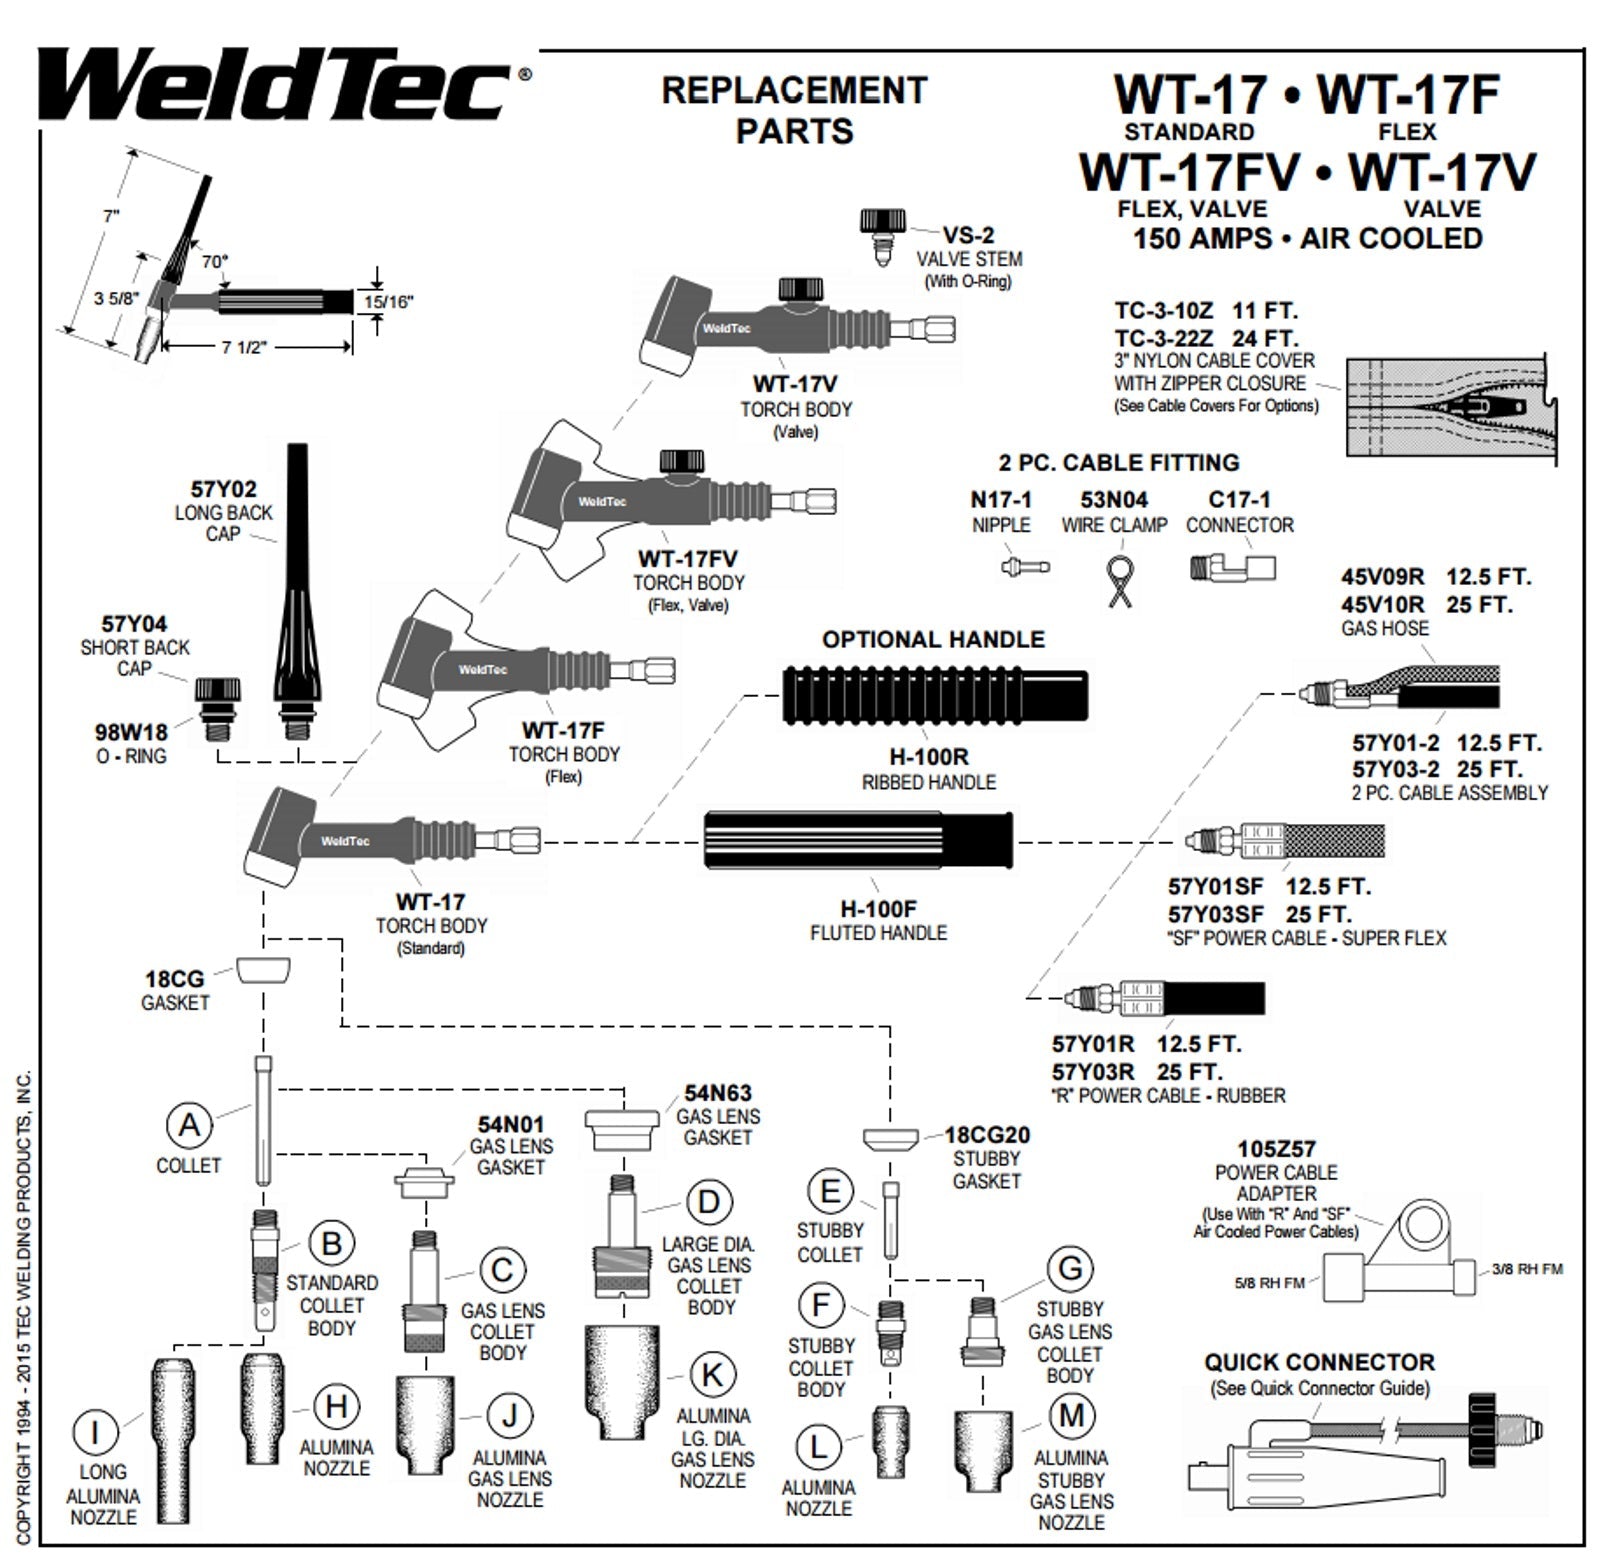 Weldtec 25FT 150 Amp Air Cooled TIG Torch with Flex and Valve  (WT-17FV-25R)